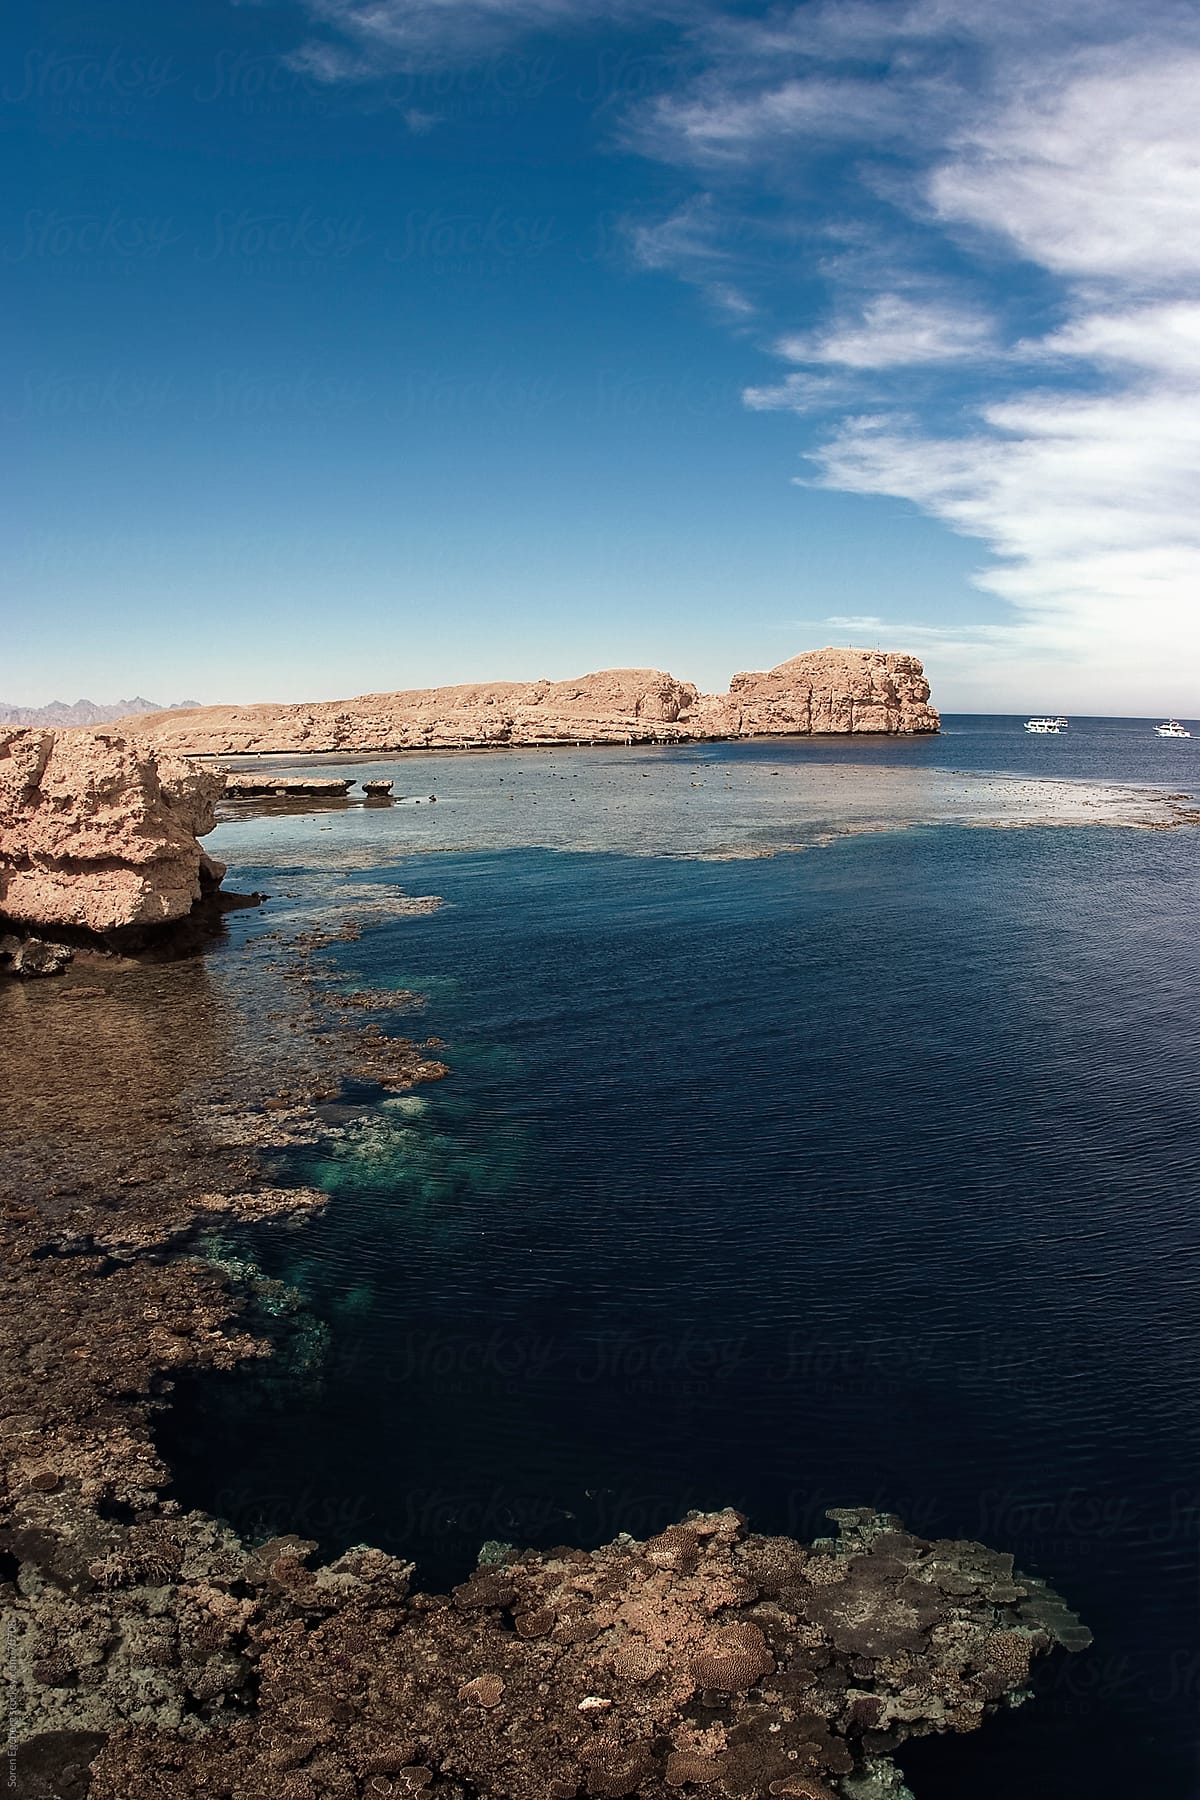 Rocky coastline and coral reefs